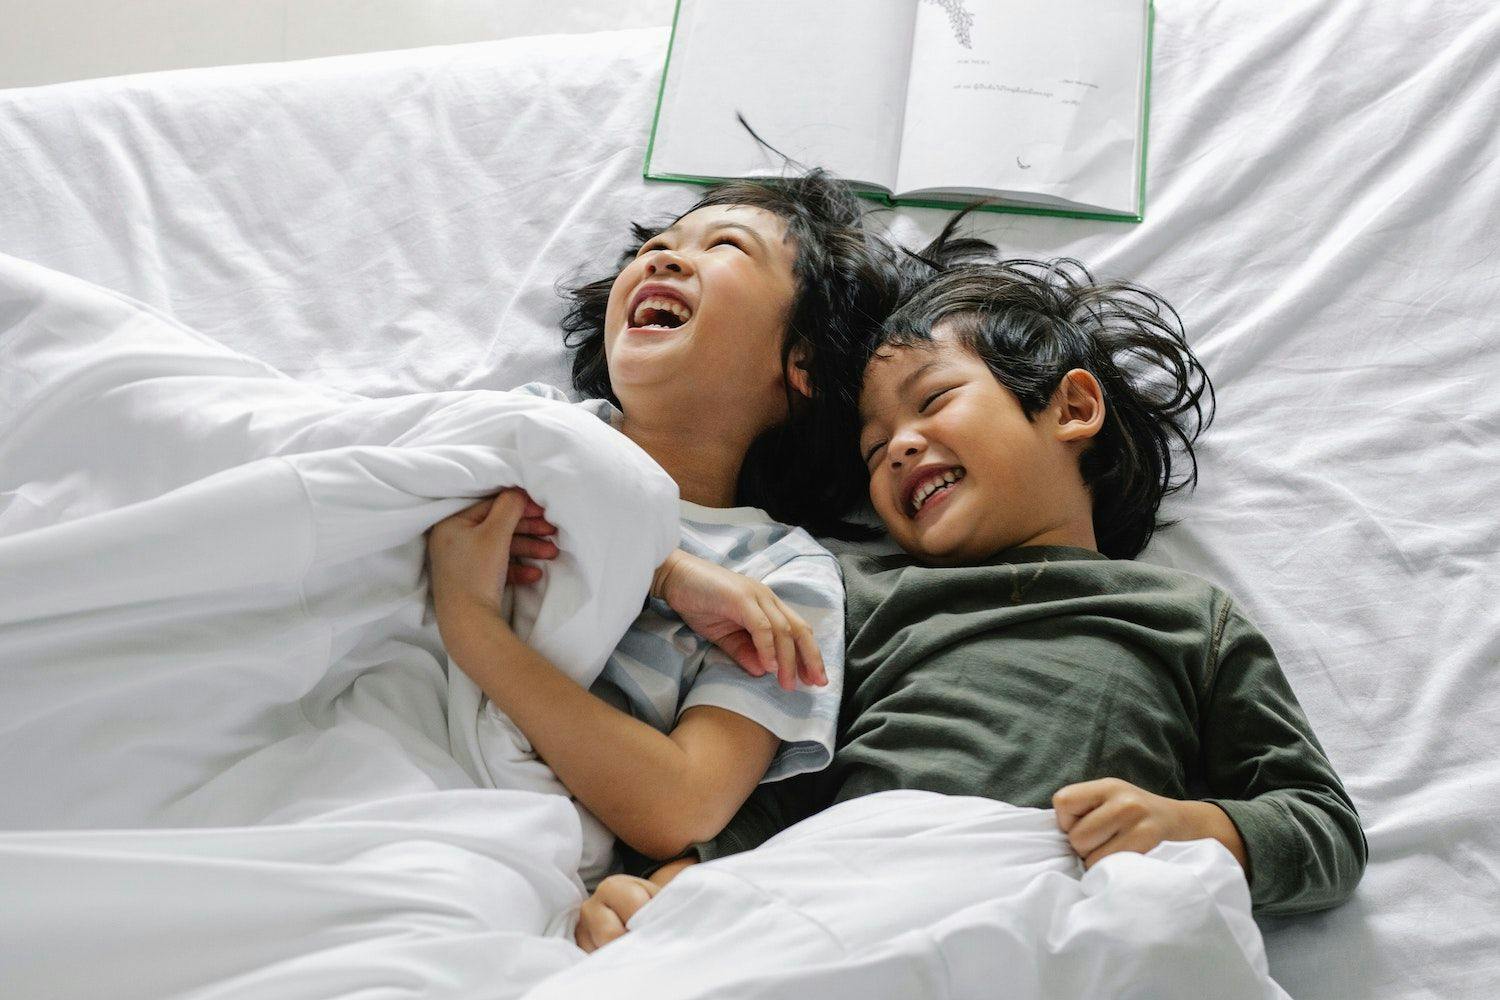 How to improve your child’s sleep in the pandemic